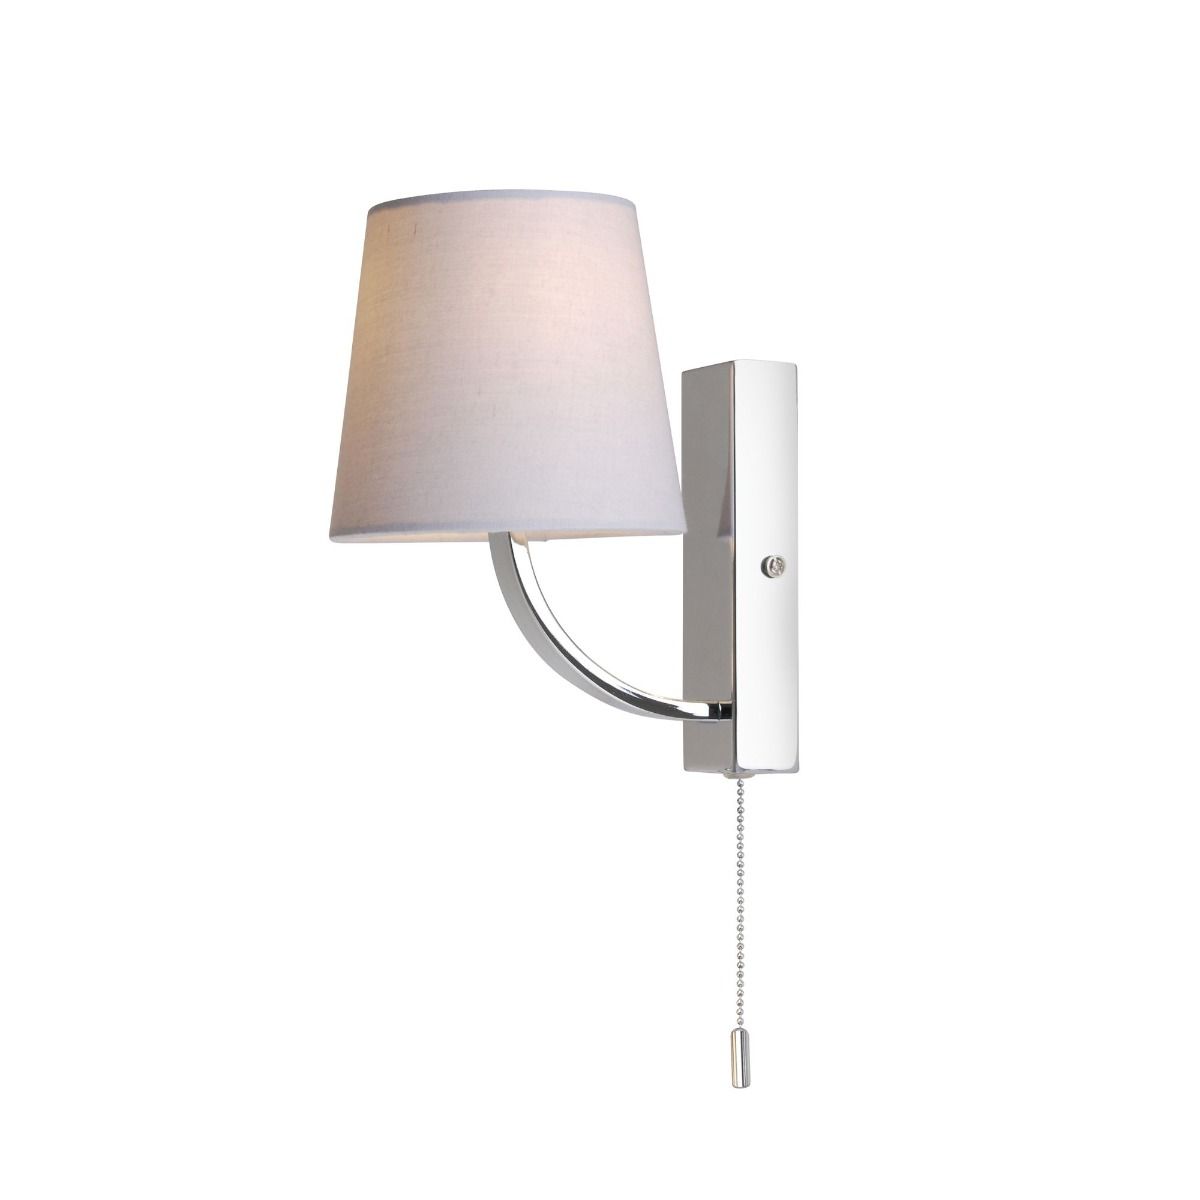 Condella Compact Wall Fitting Polished Chrome Wall Light